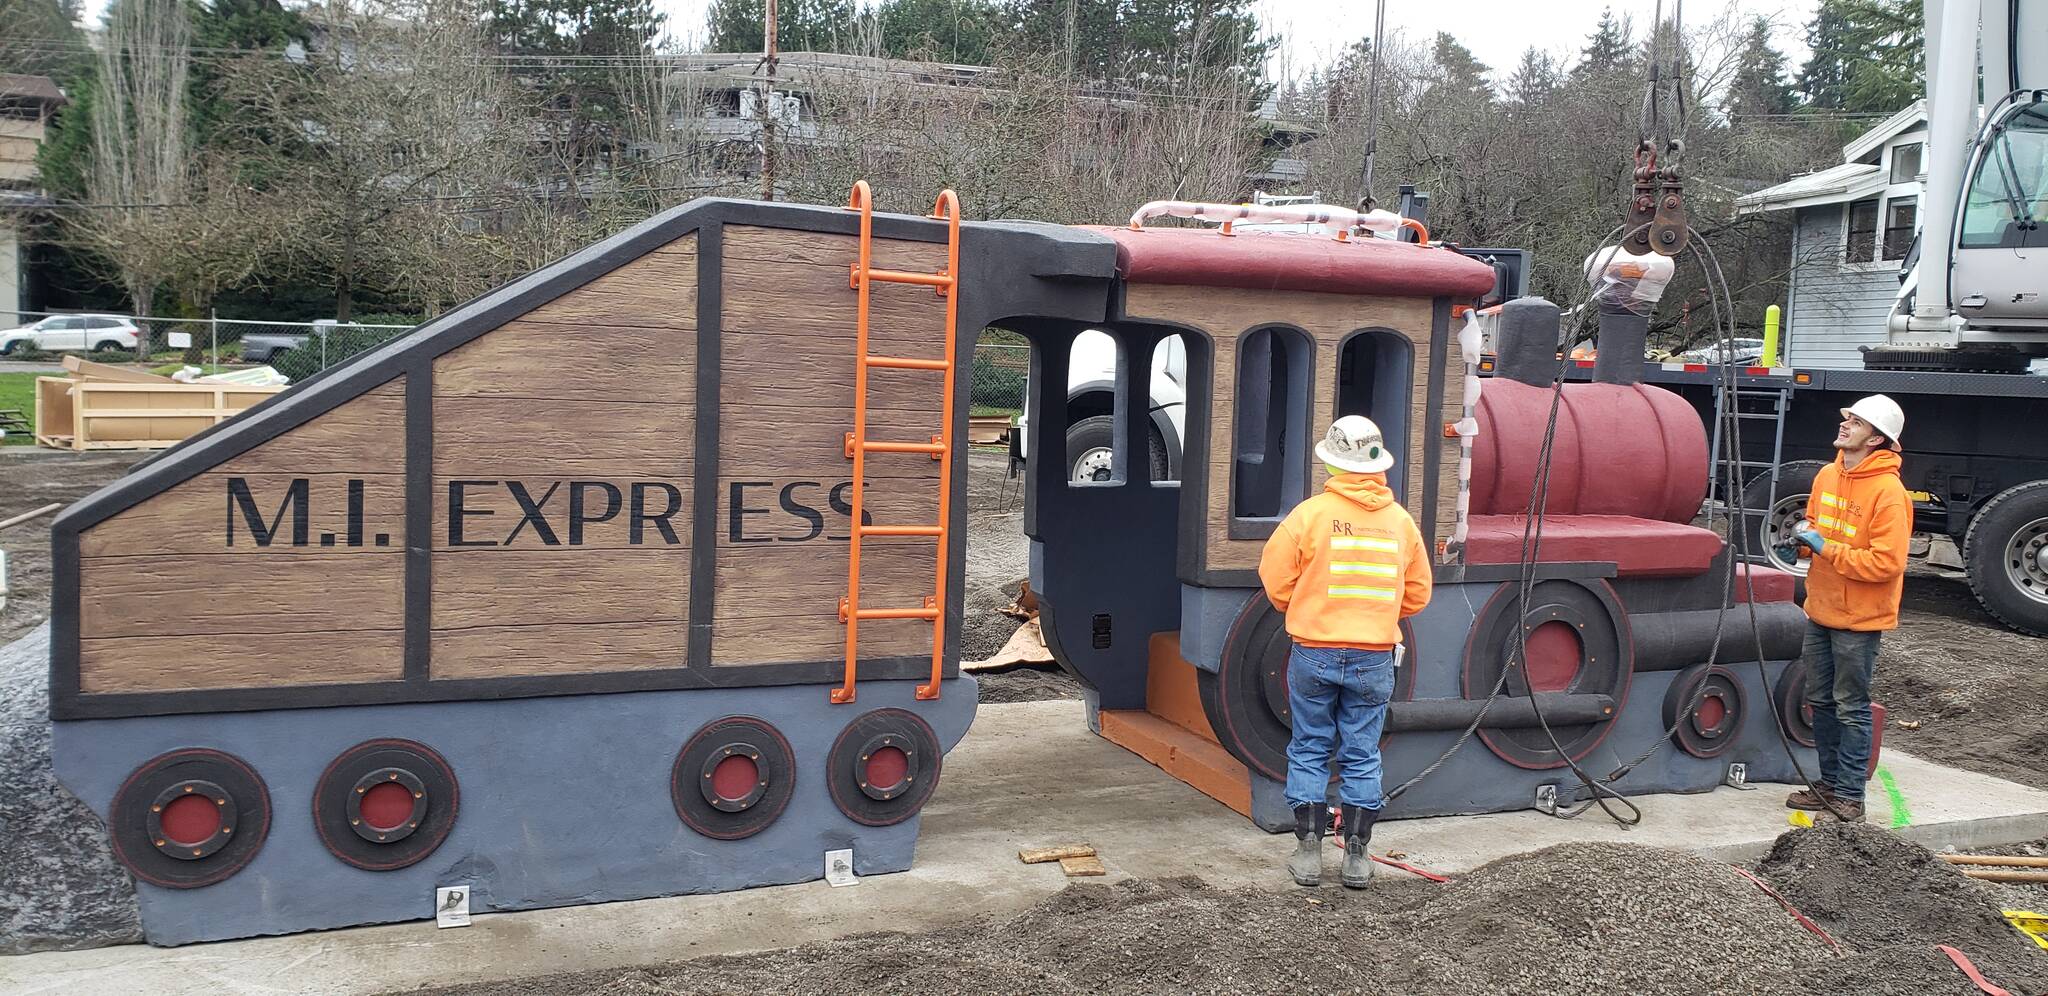 On Dec. 10, the long-awaited new train sculpture arrived and was lifted into place at the Mercerdale Park playground. Each section weighs 12,500 pounds and will be accessible to wheelchairs in the center. Other new playground equipment is slated to be delivered in mid-December, and the playground grand opening will likely be held in early 2022, according to the city. Photo courtesy of John Hamer